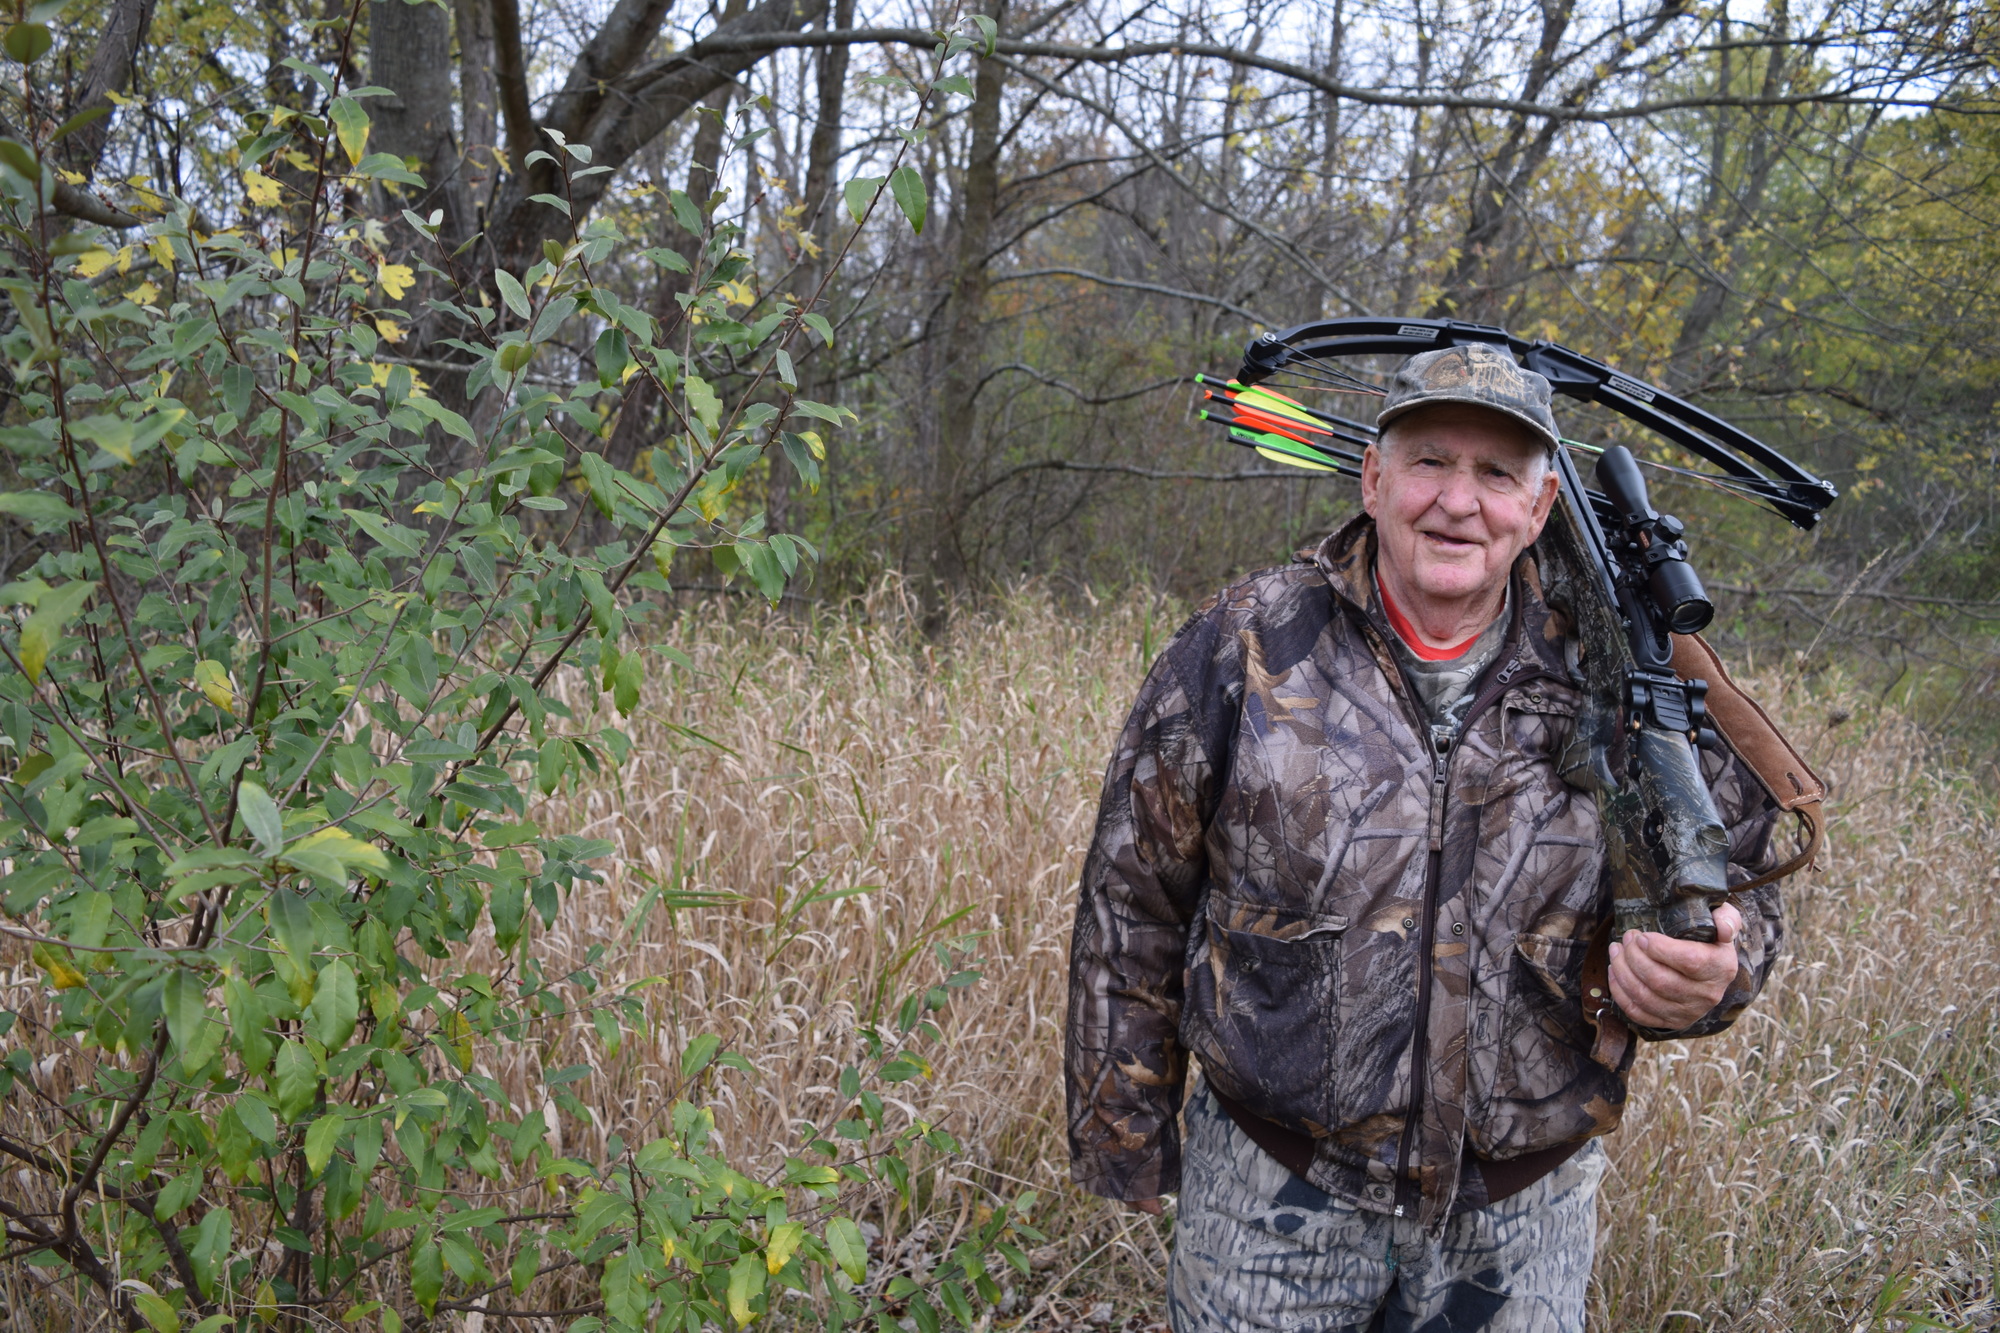 Bob Wygant, a retired mason who lives in Williamston, said he started hunting when he was 14 and missed just two seasons in the following 71 years.